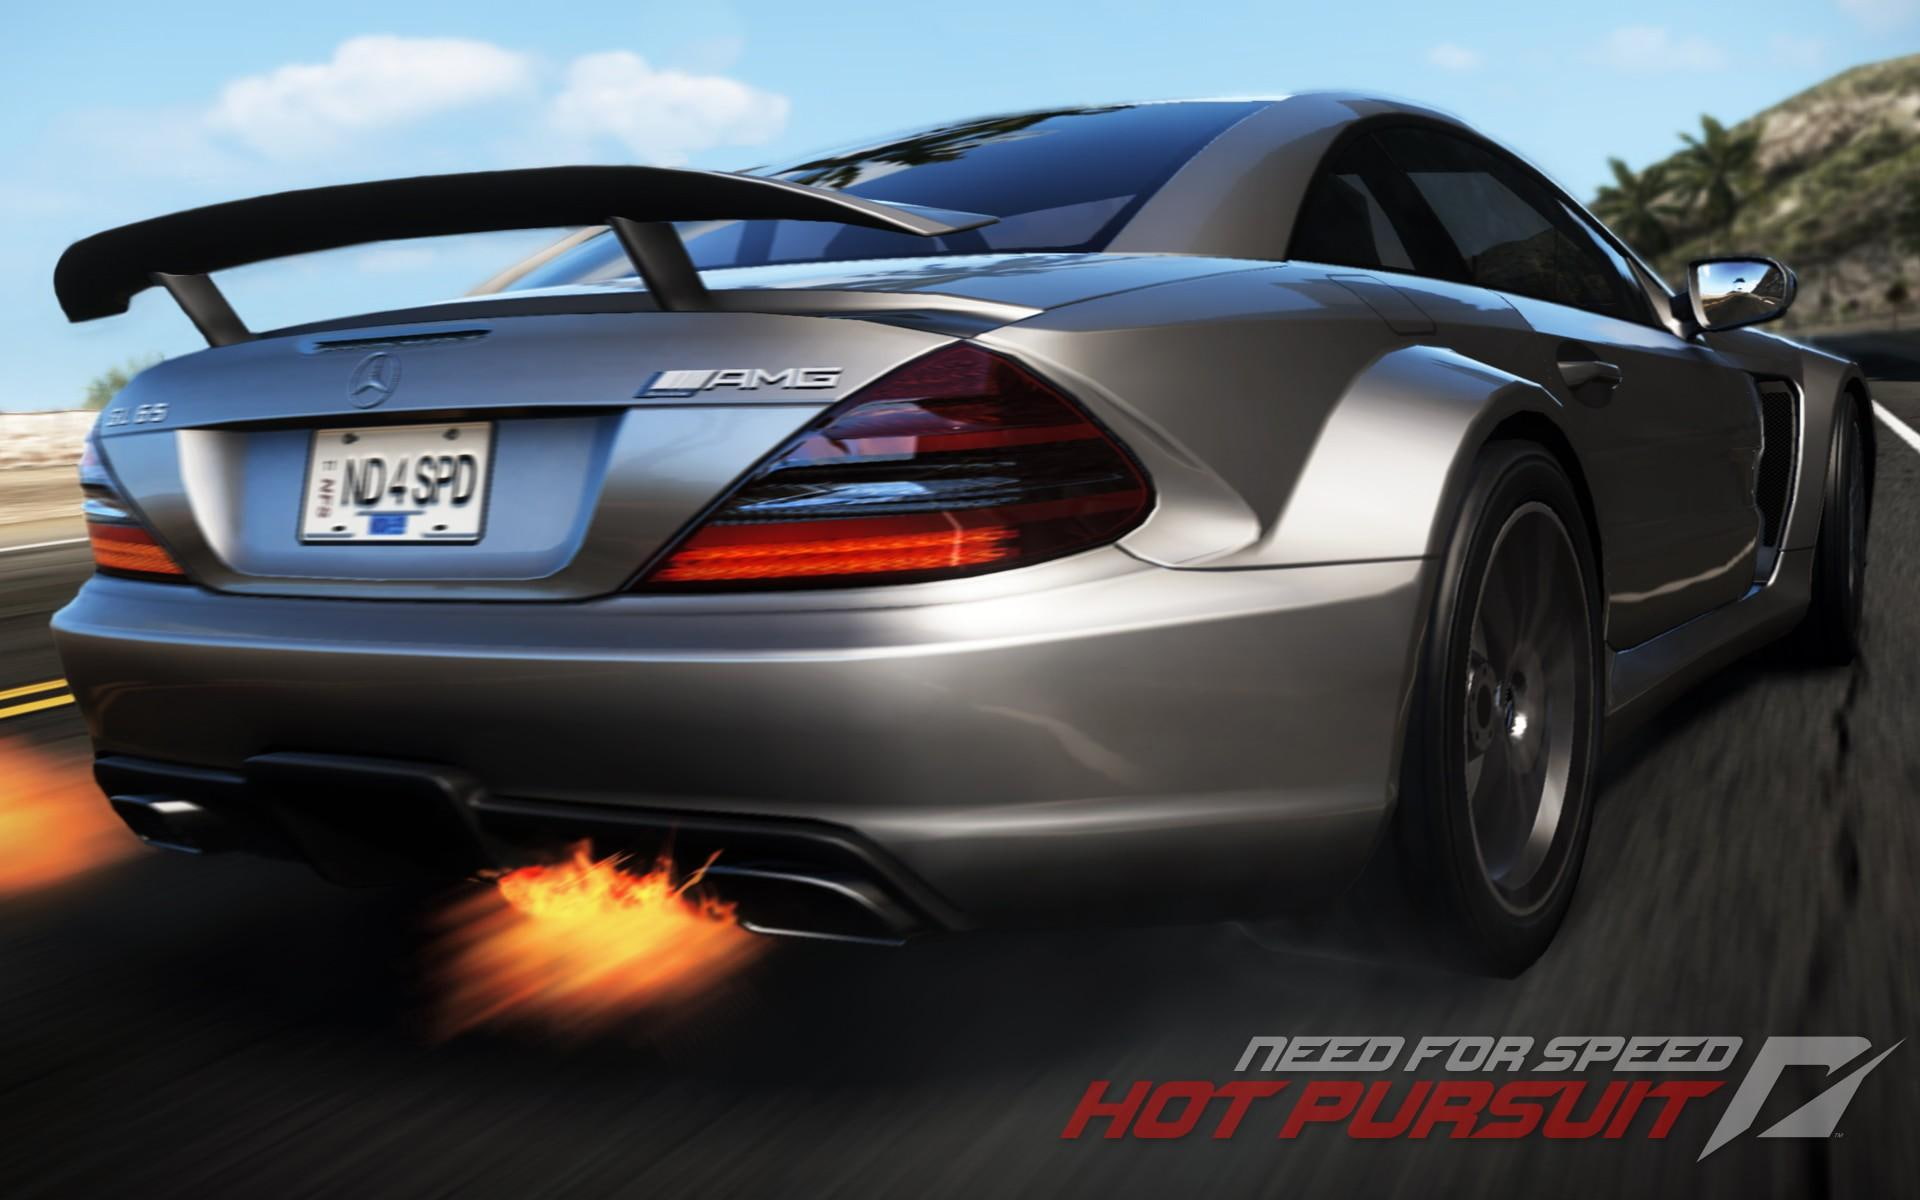 Mercedes Sl65 Amg Black Series, need for speed, hot pursuit, games